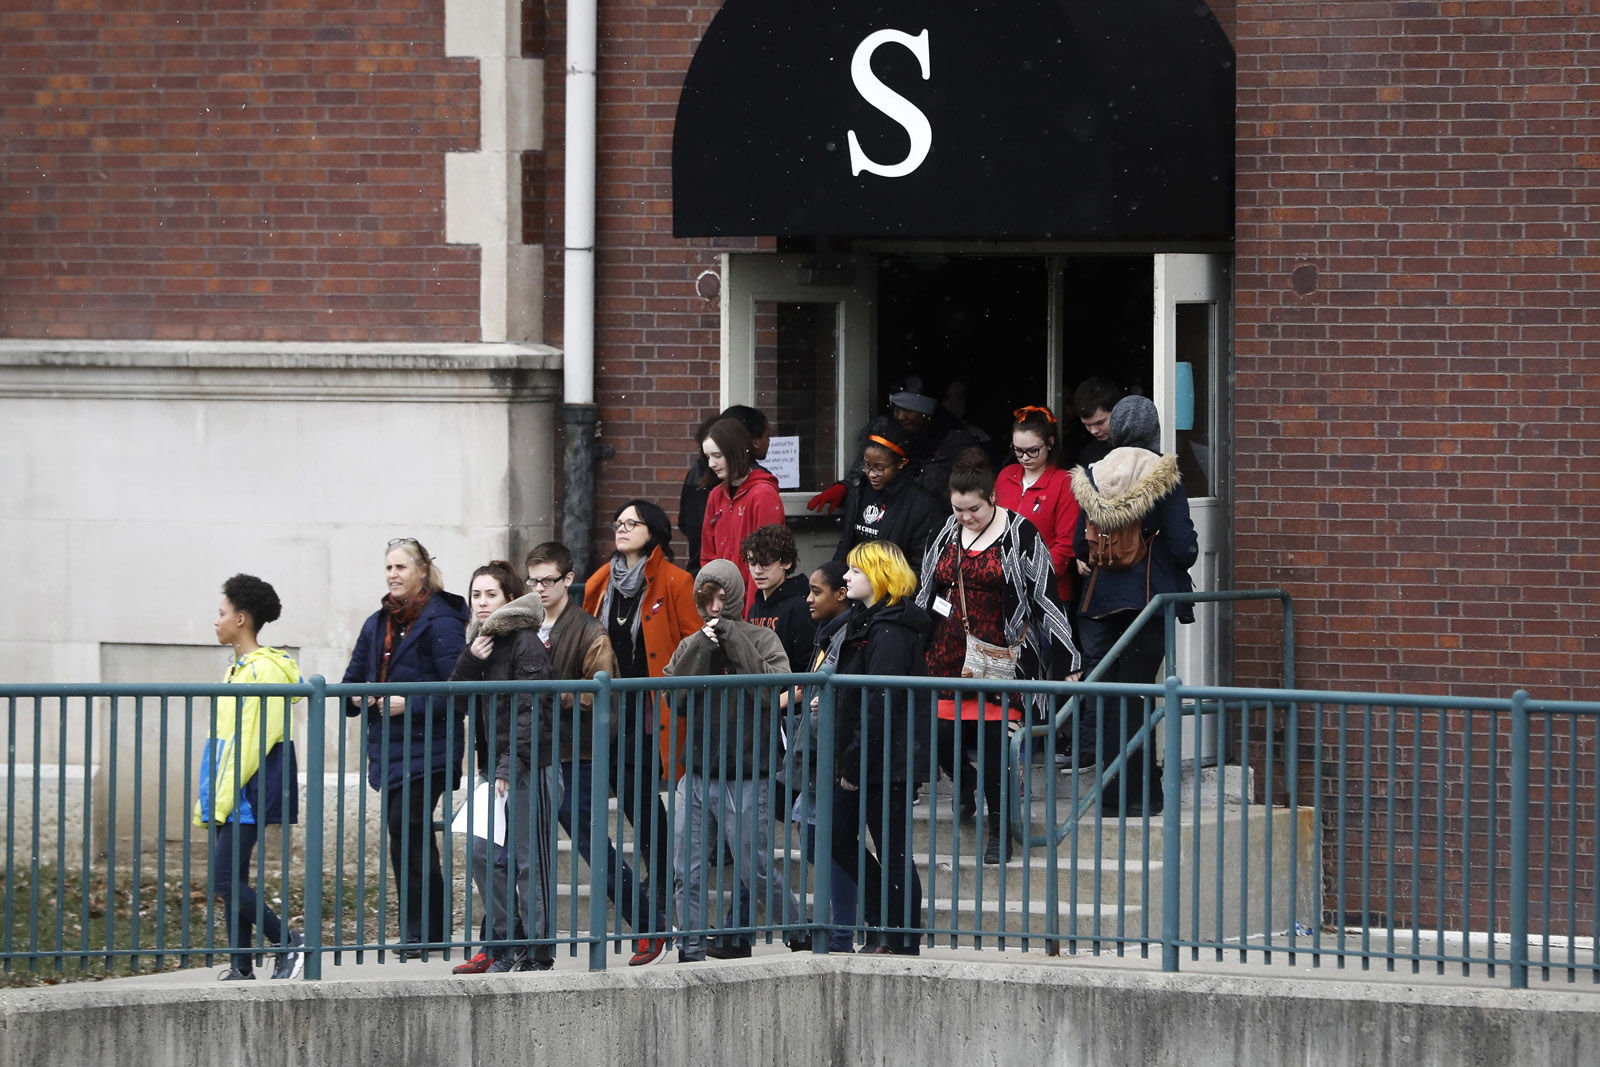 Students exit the building before gathering on their soccer field during a 17-minute walkout protest at the Stivers School for the Arts, Wednesday, March 14, 2018, in Dayton, Ohio. Students across the country planned to participate in walkouts Wednesday to protest gun violence, one month after the deadly shooting inside a high school in Parkland, Fla. (AP Photo/John Minchillo)